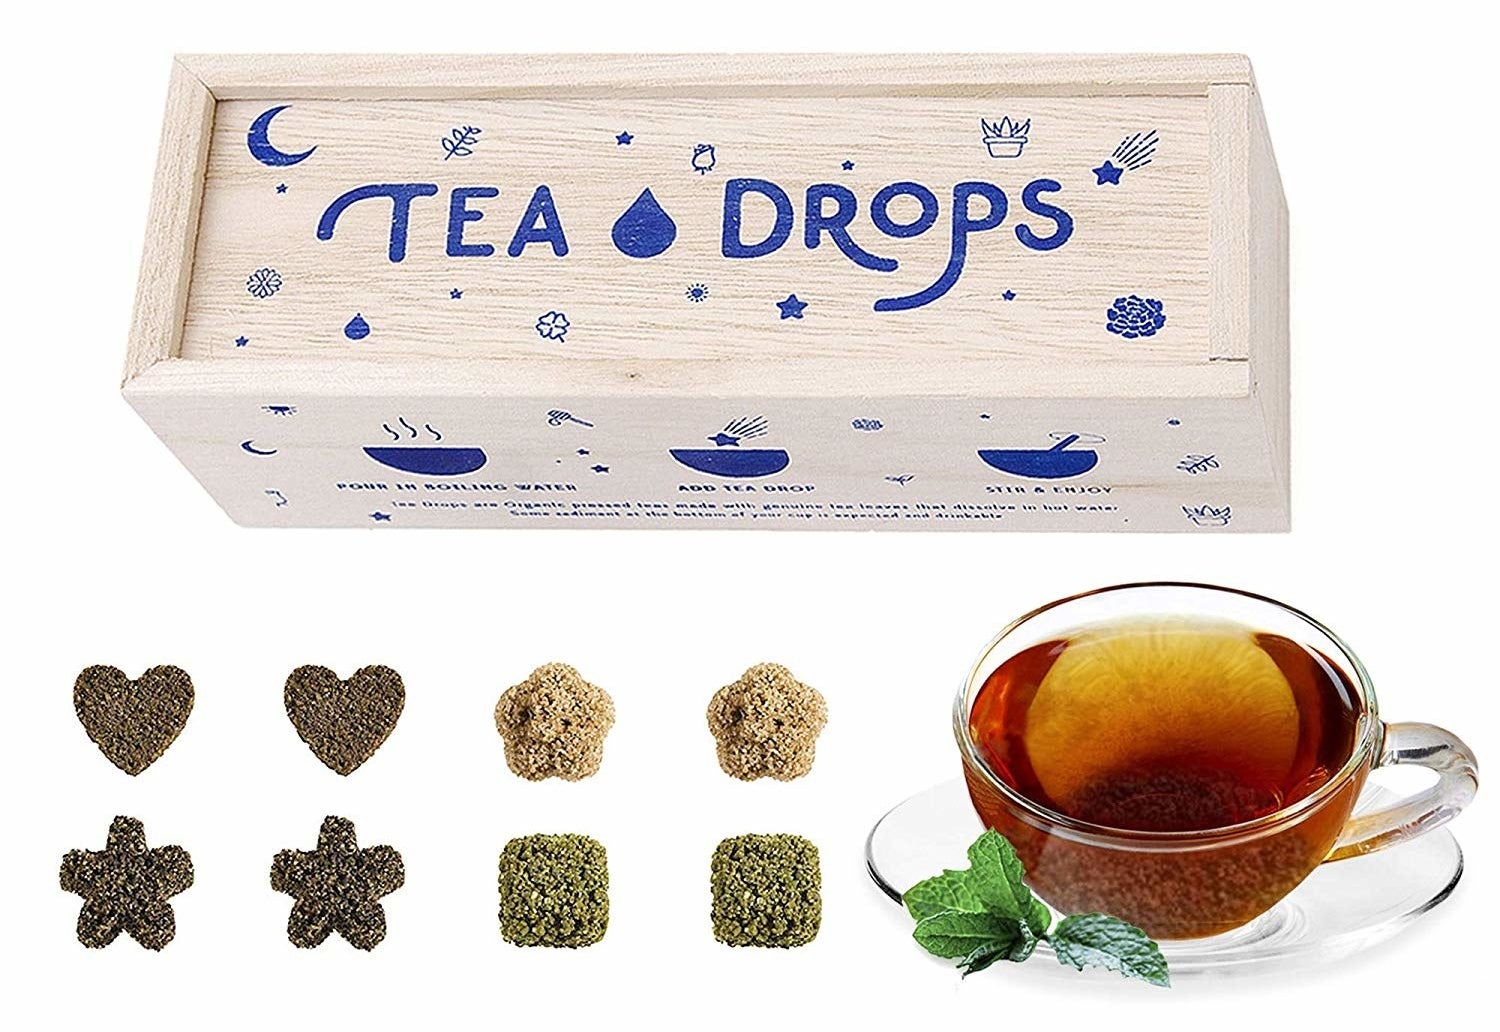 the gift box plus the tea drops in different shapes like flowers and hearts